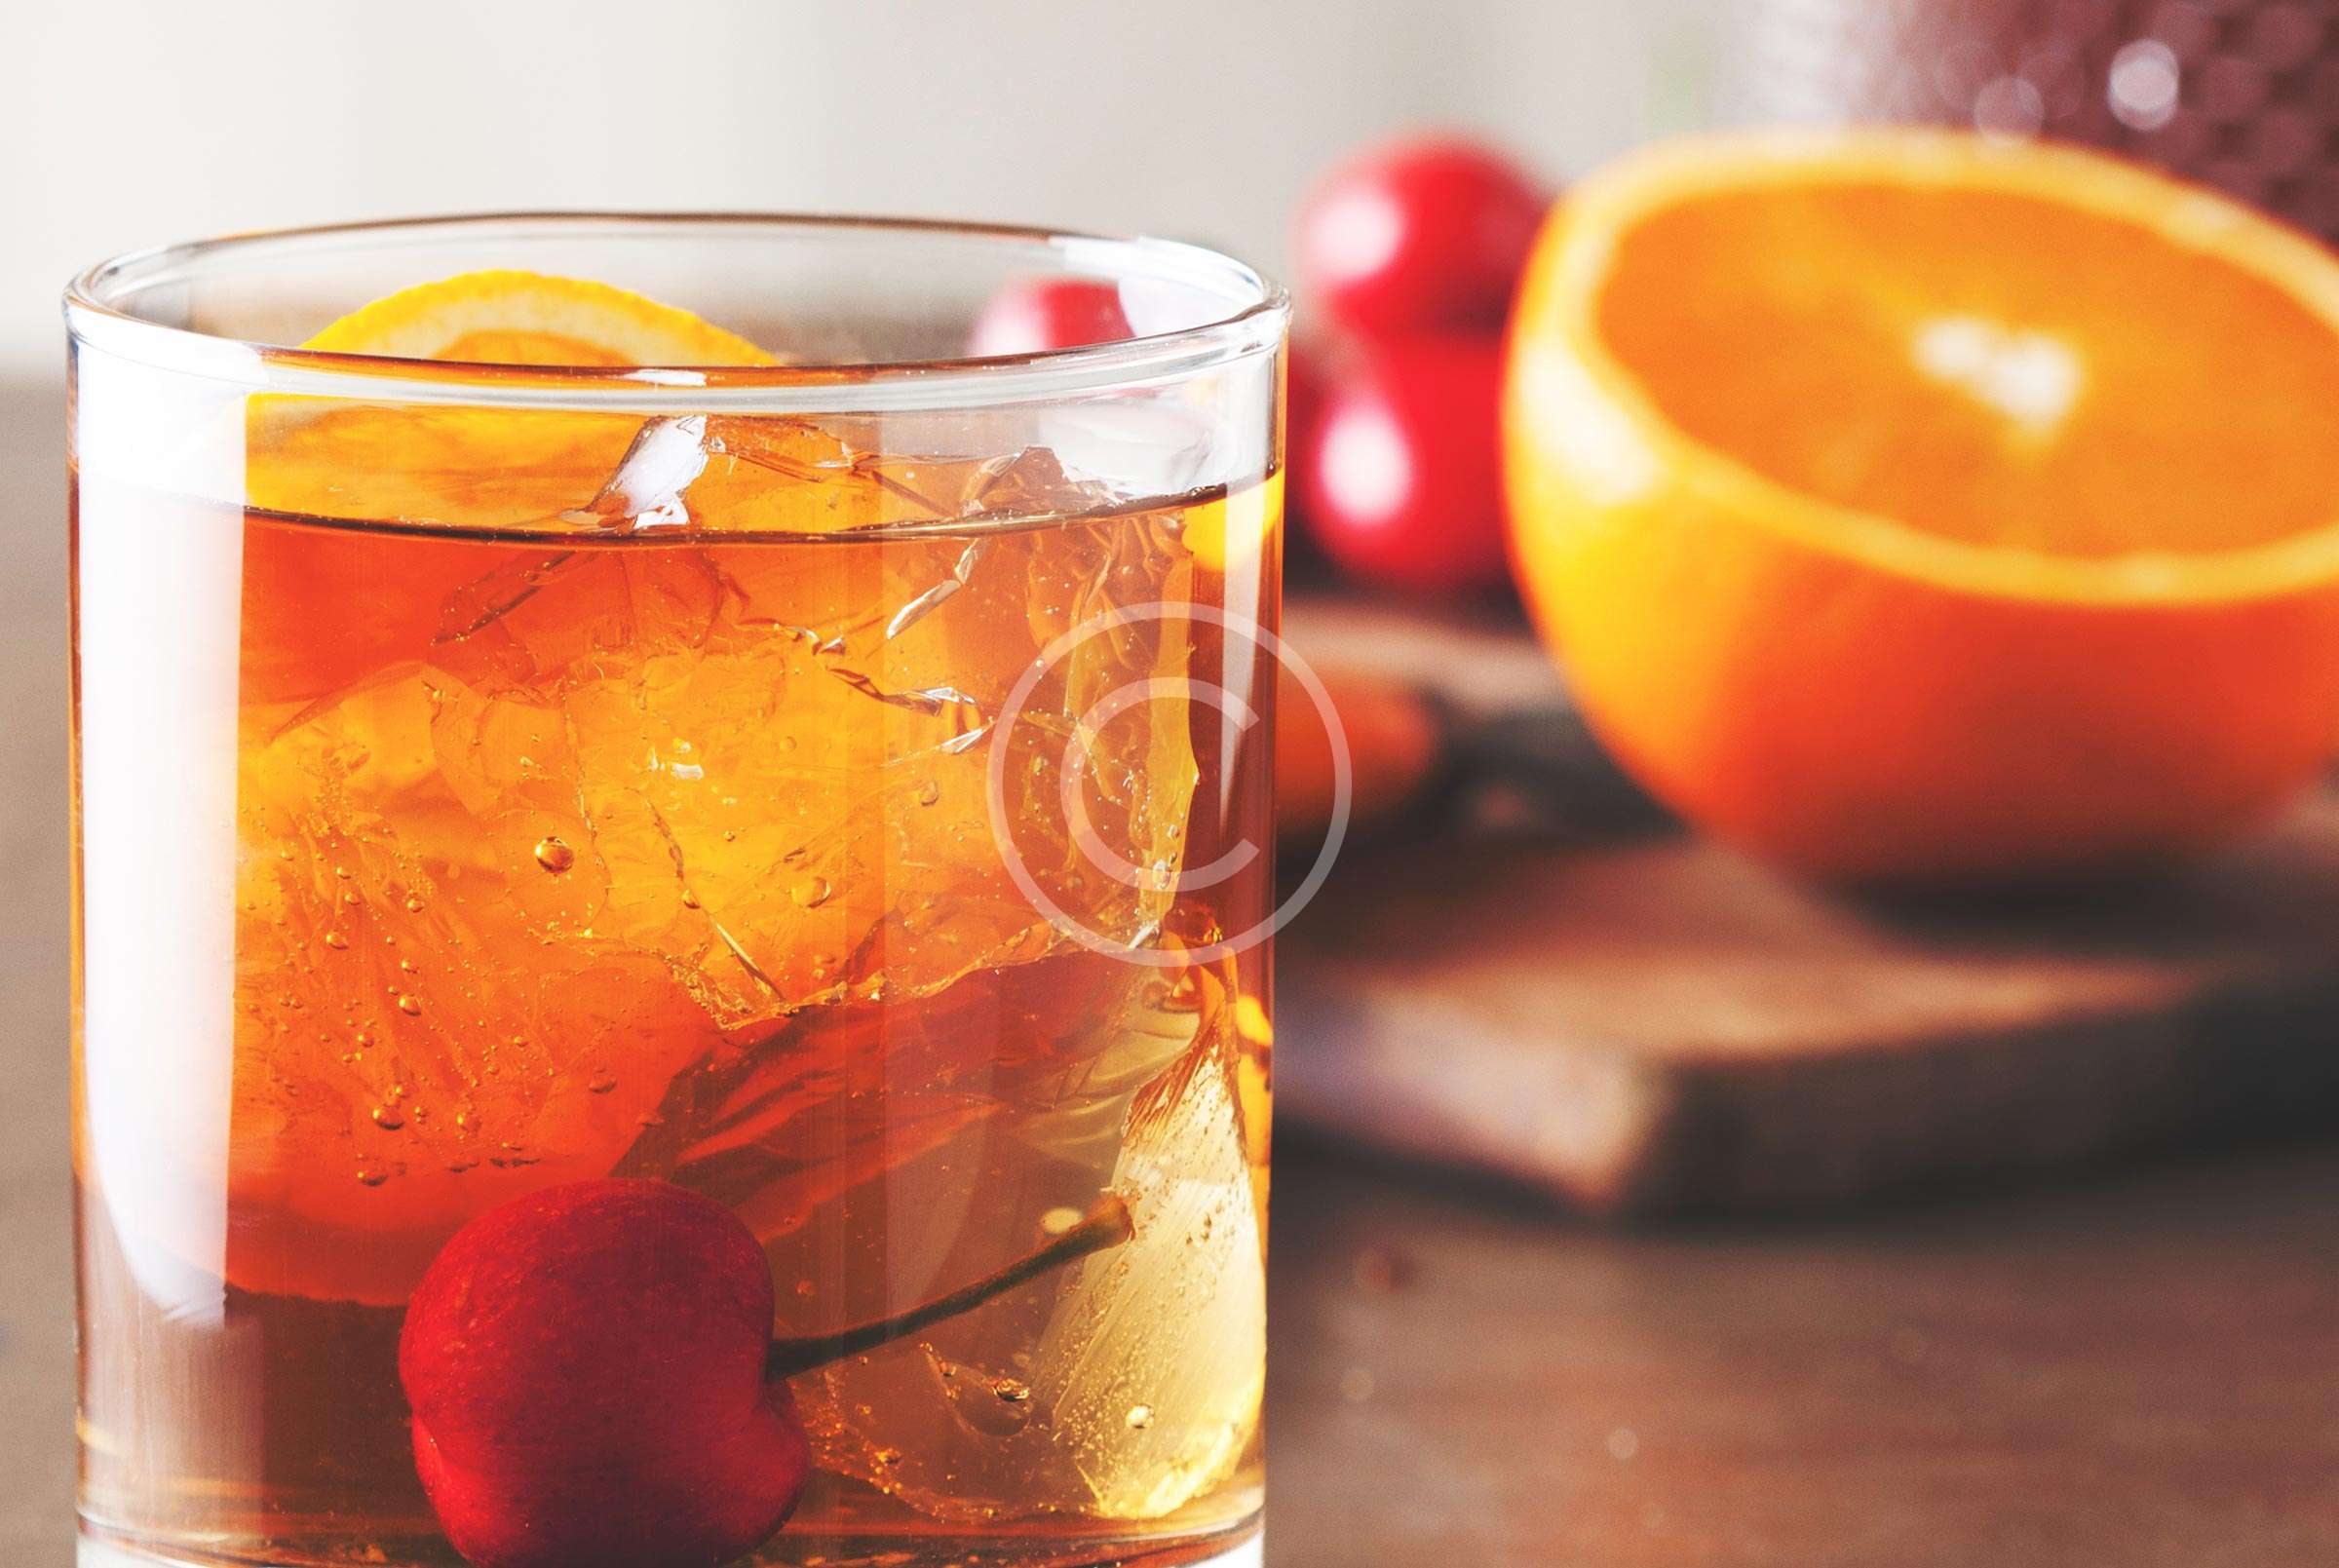 That’s How We Make “Old fashioned”